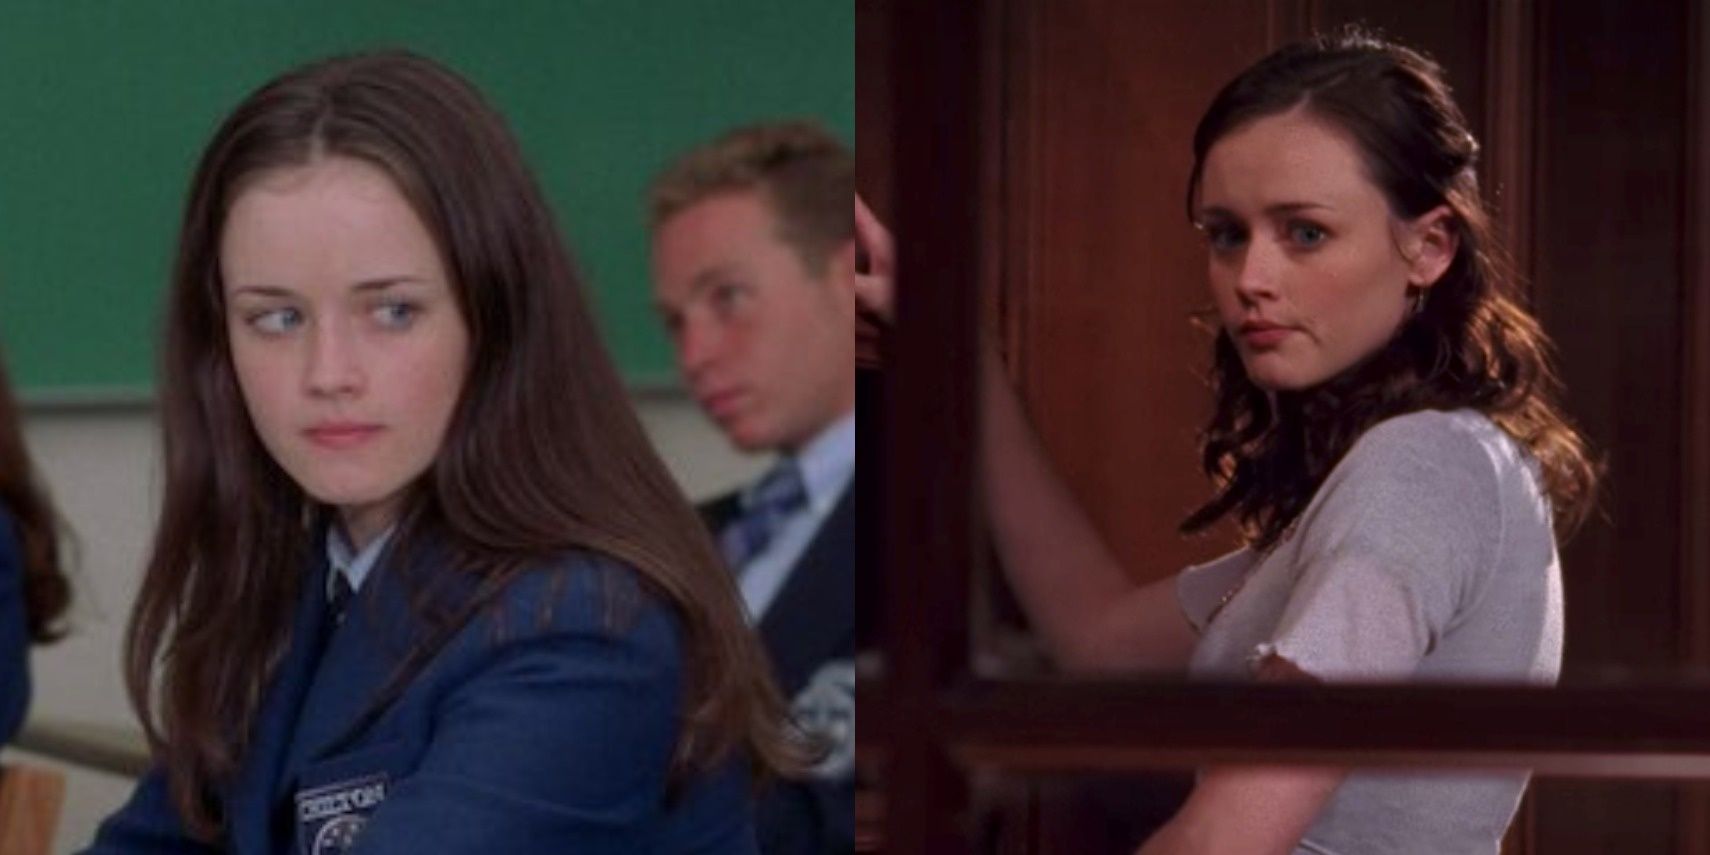 Rory Gilmore (Alexis Bledel) at Chilton; Rory leaving Yale University in &quot;Gilmore Girls.&quot;